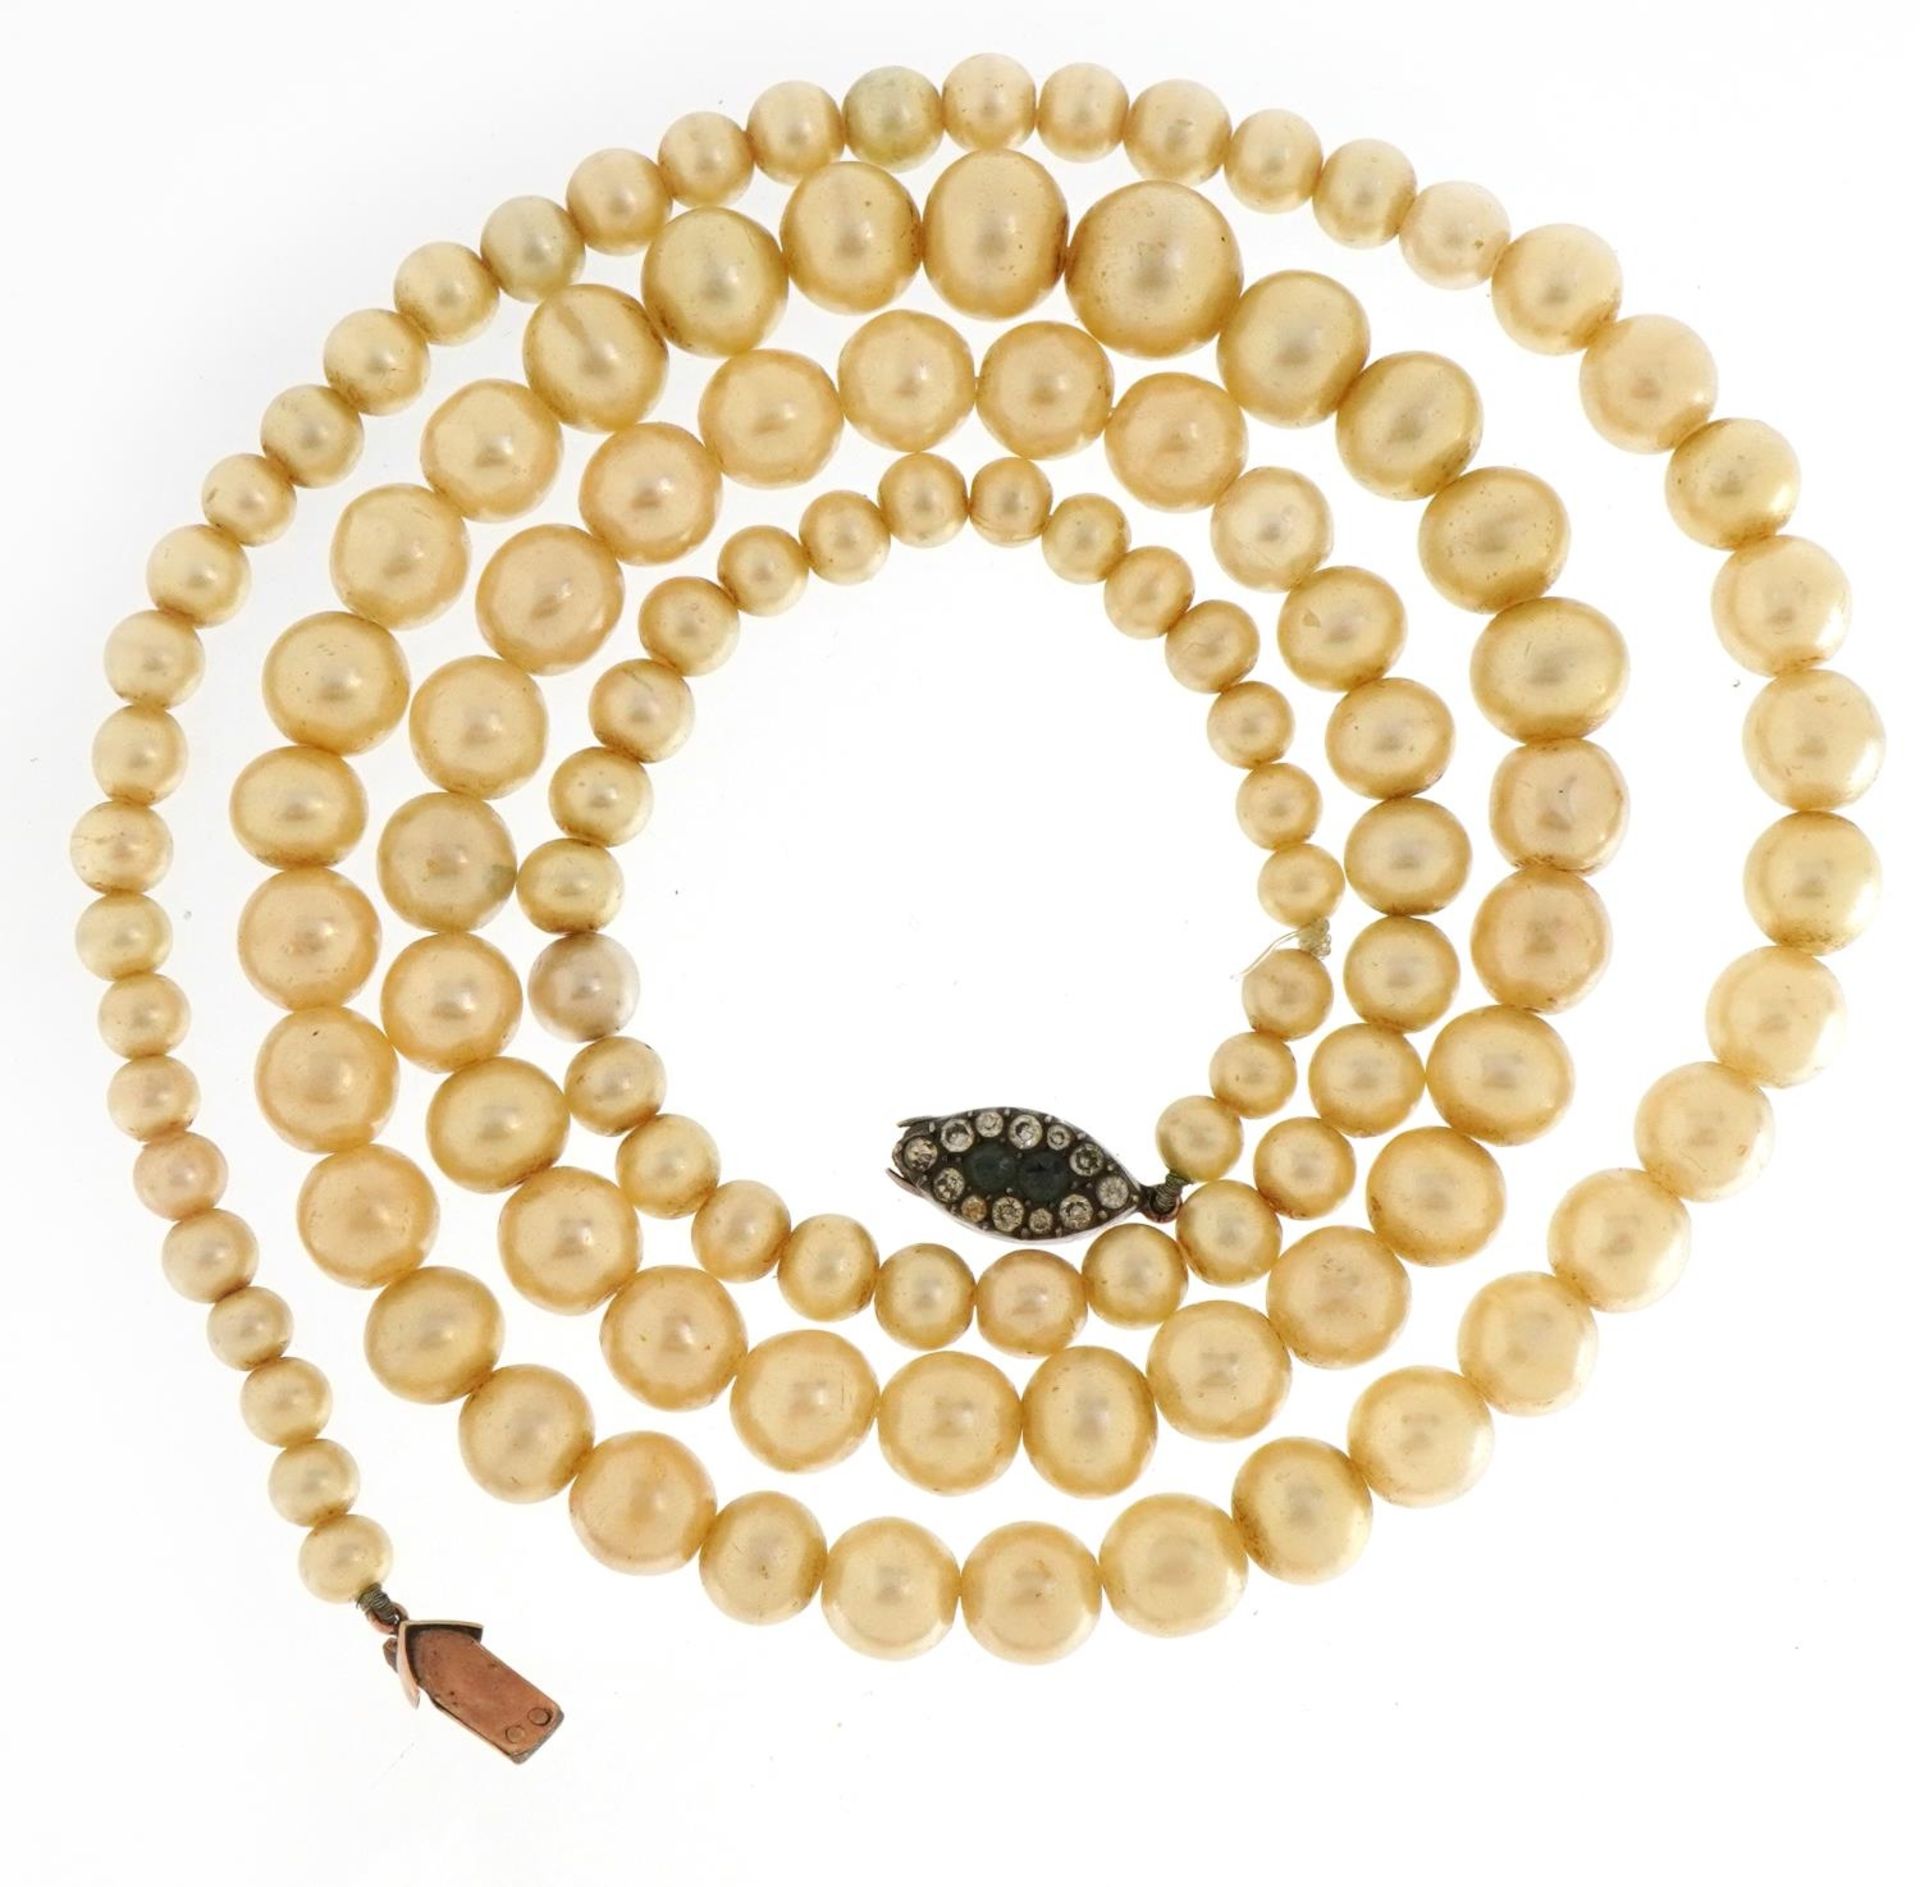 Graduated simulated pearl bead necklace with 9ct rose gold paste set clasp, 78cm in length, 60.8g - Image 2 of 4